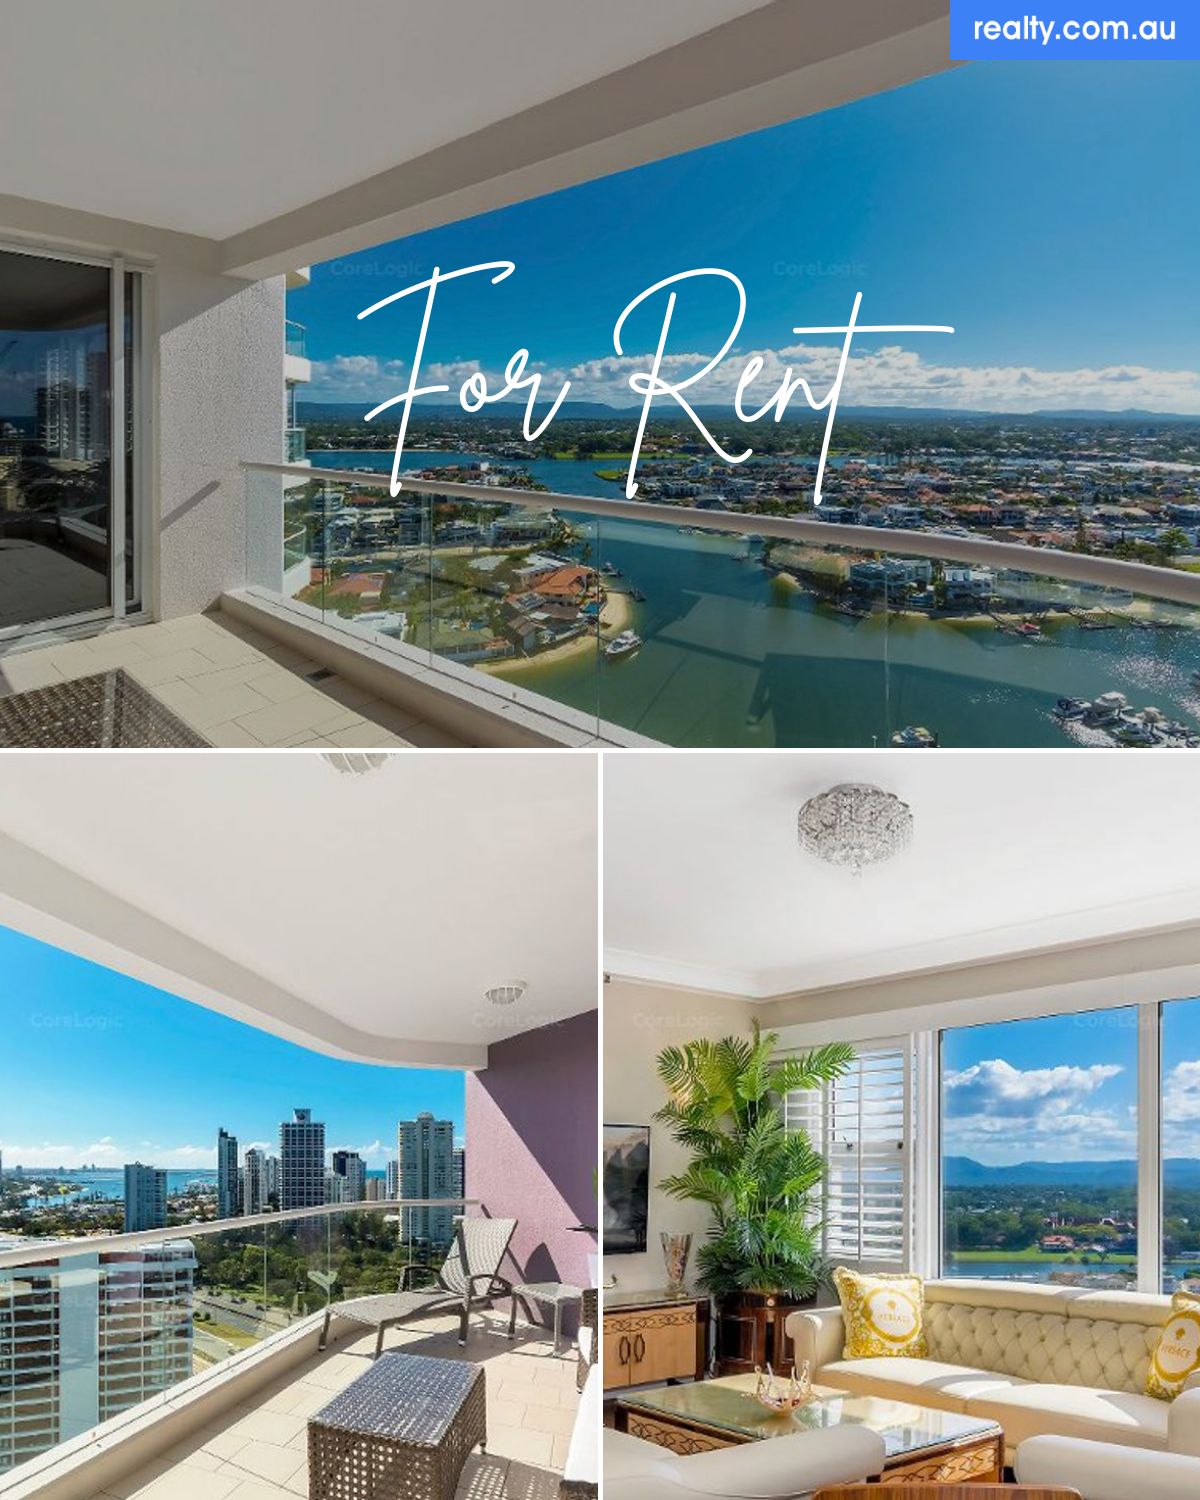 123/12 Commodore Drive, Surfers Paradise, QLD 4217 | Realty.com.au